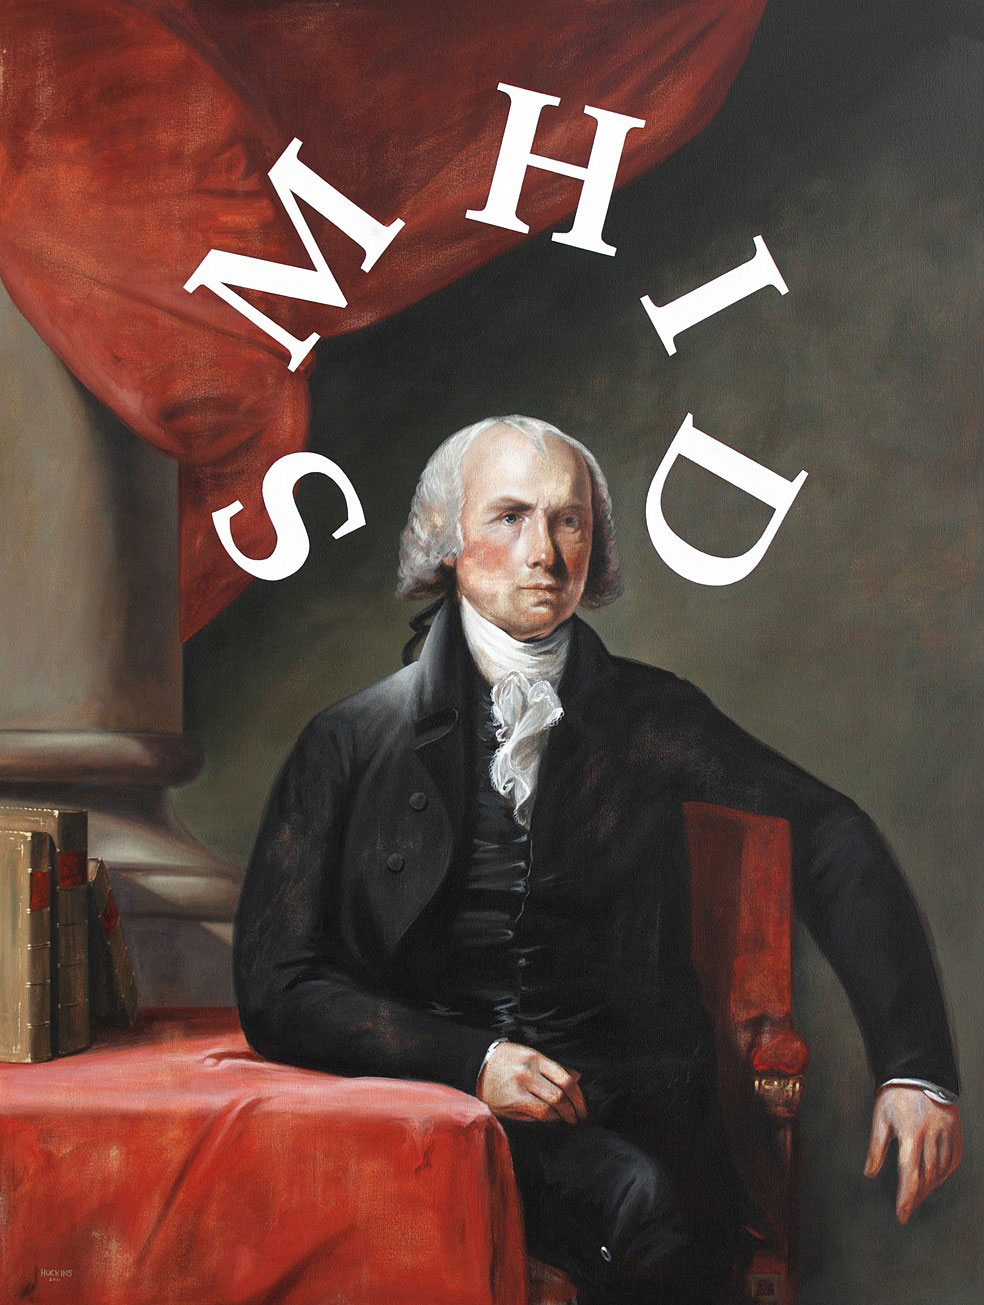 Shawn Huckins, Status Update of Mr. Madison, (Scratching My Head In Disbelief), acrylic on canvas, 52 x 40 in (135 x 102 cm), 2011. Private collection, Kristiansand, Norway.